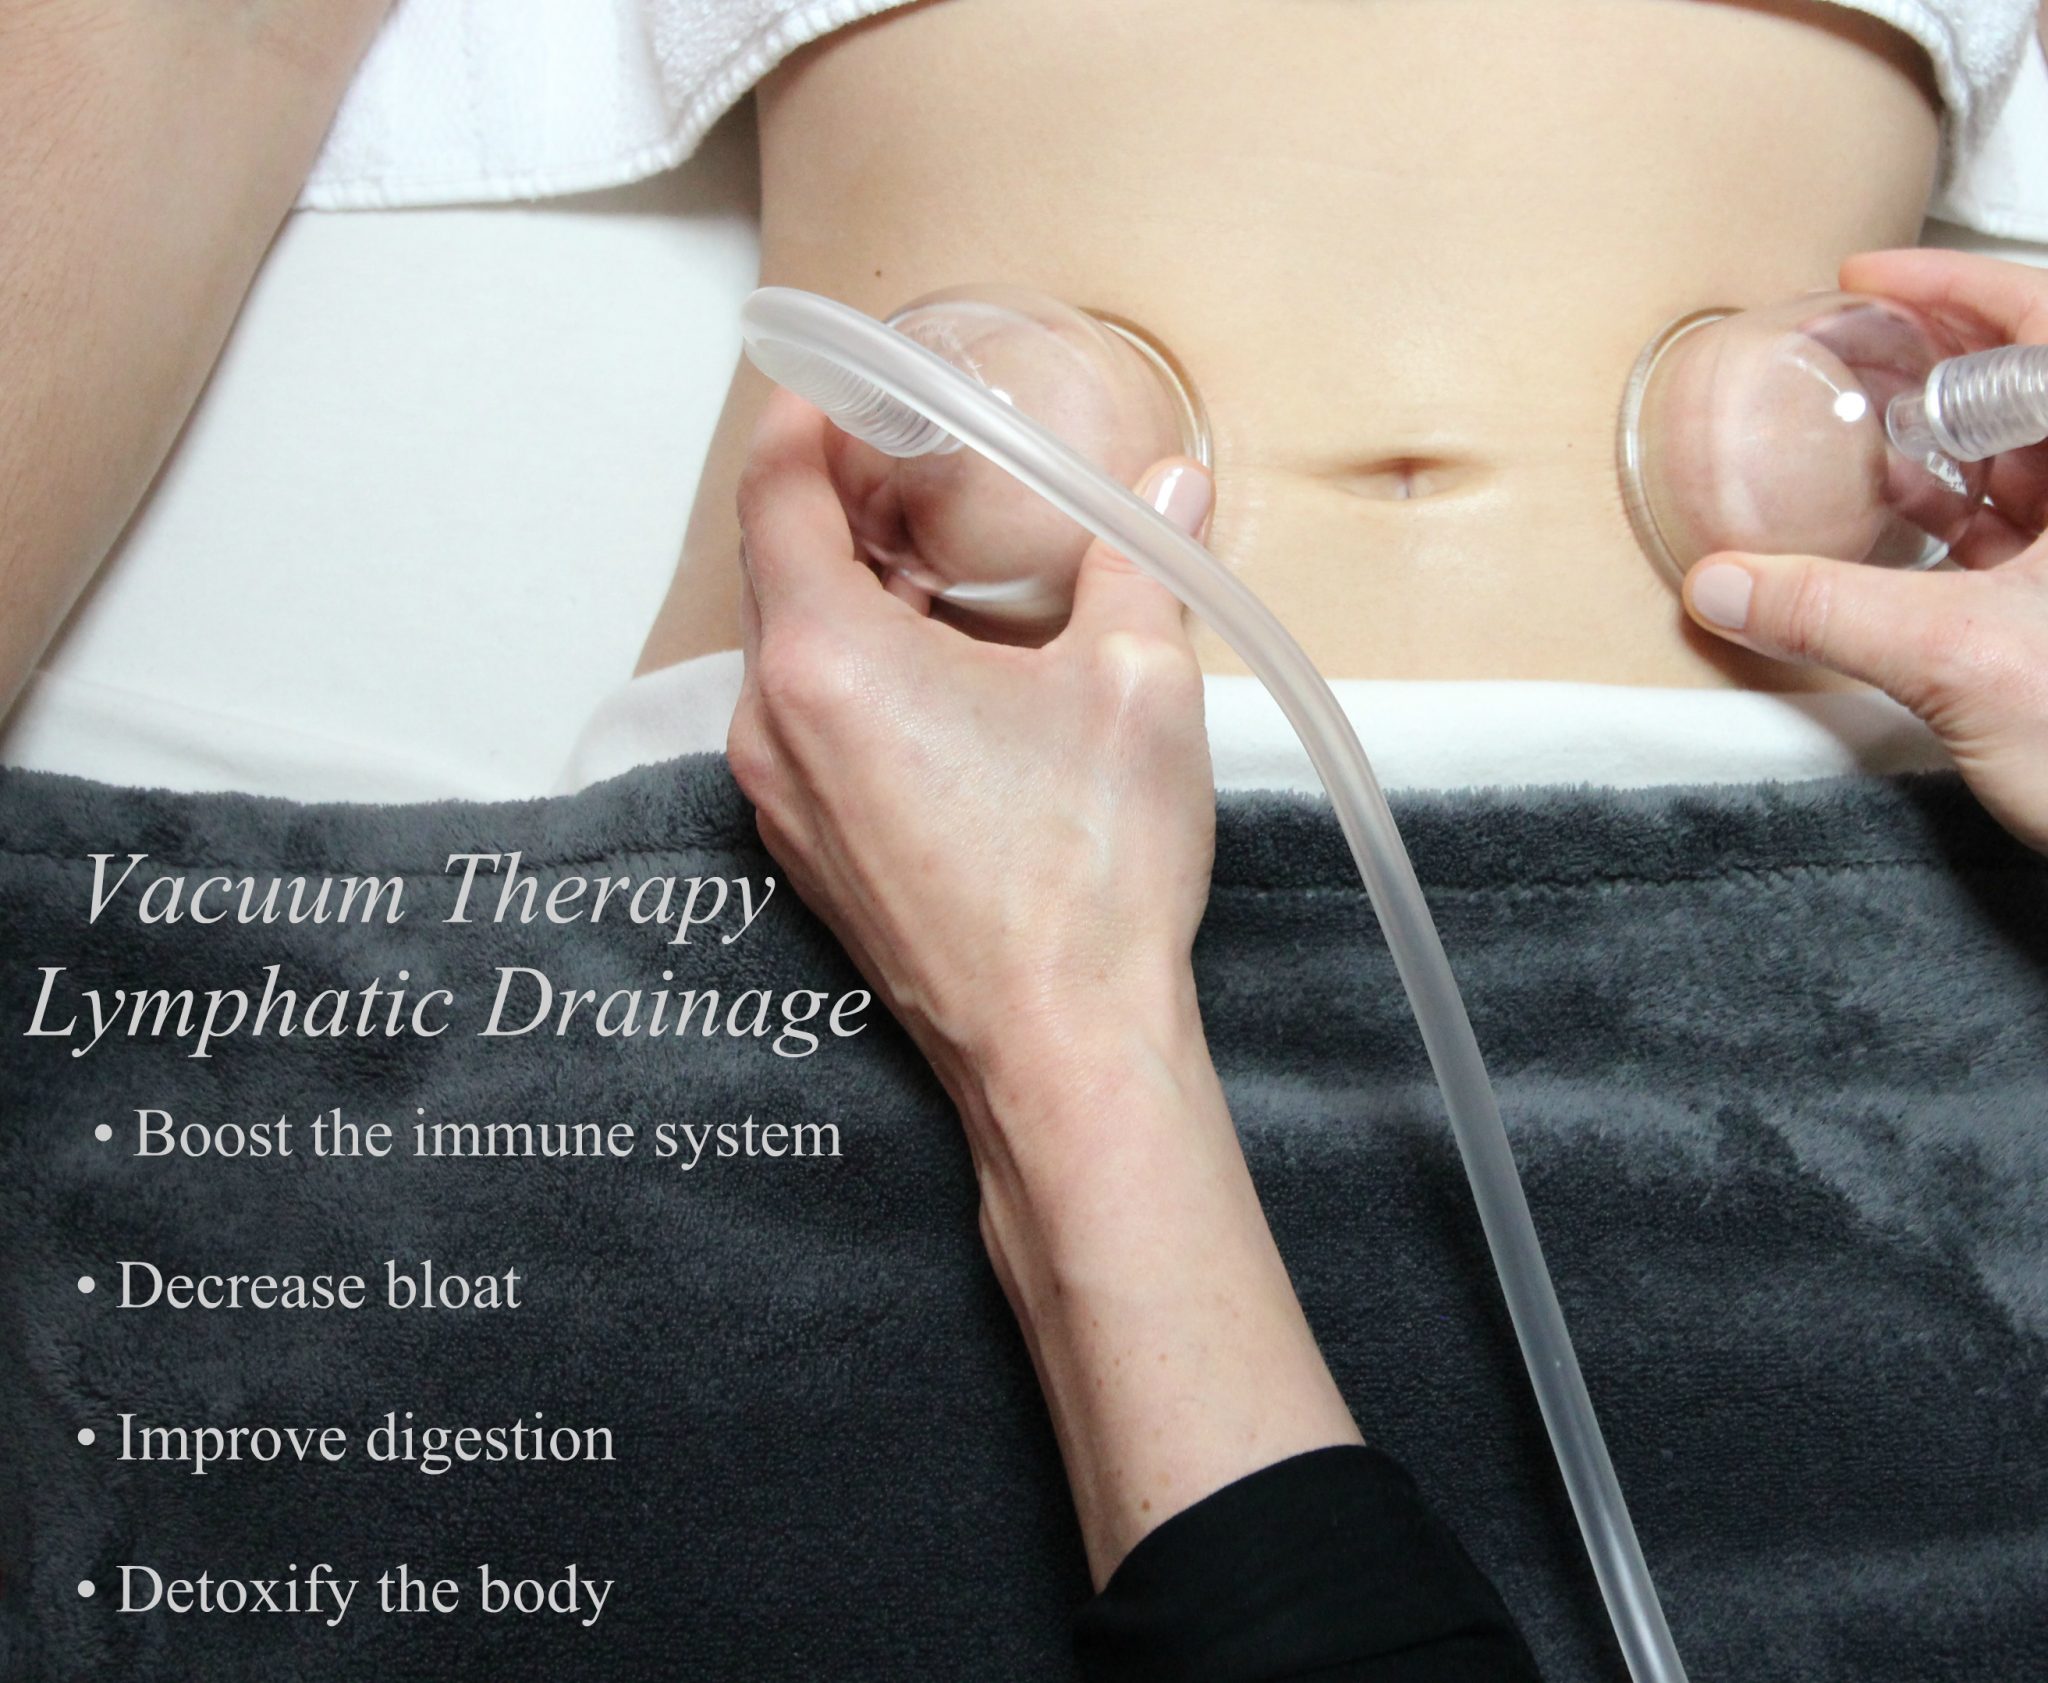 Vacuum Therapy Vacuum Therapy Lymphatic Drainage Keyport Nj Lymphatic Drainage Post Op Manual